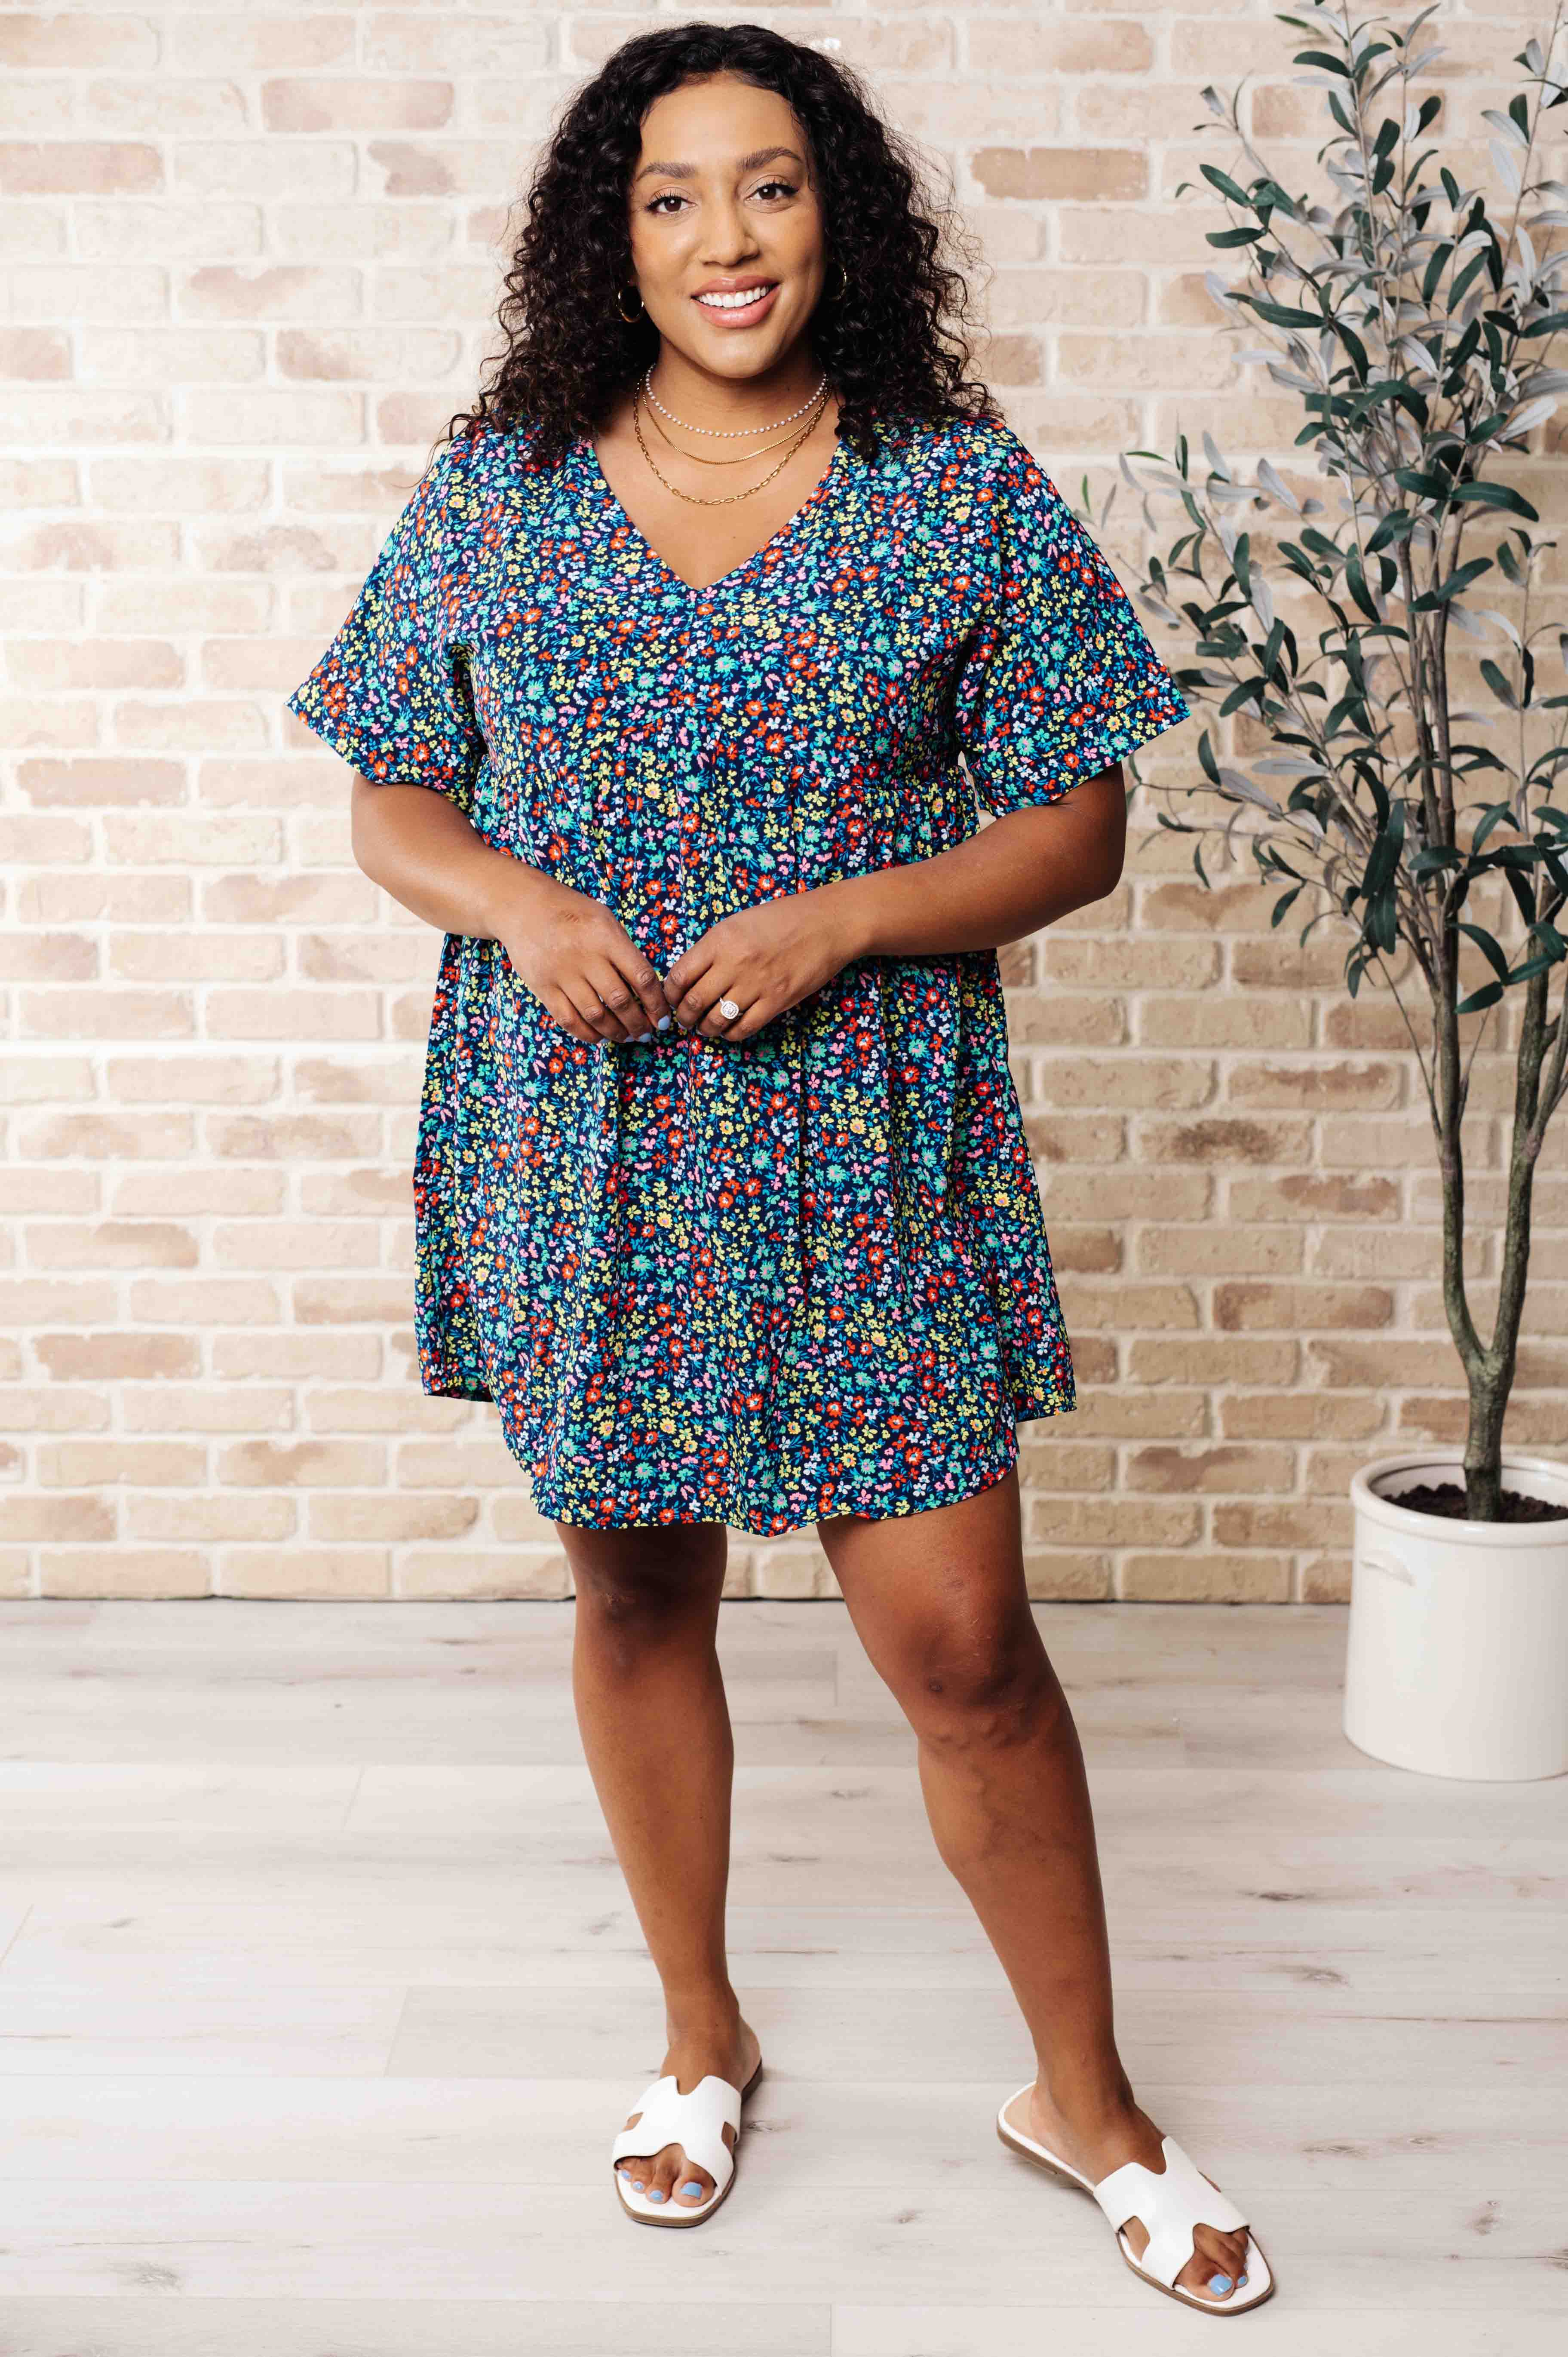 Emily Wonder What's the Hurry About? Floral Dress 3XL Ave Shops